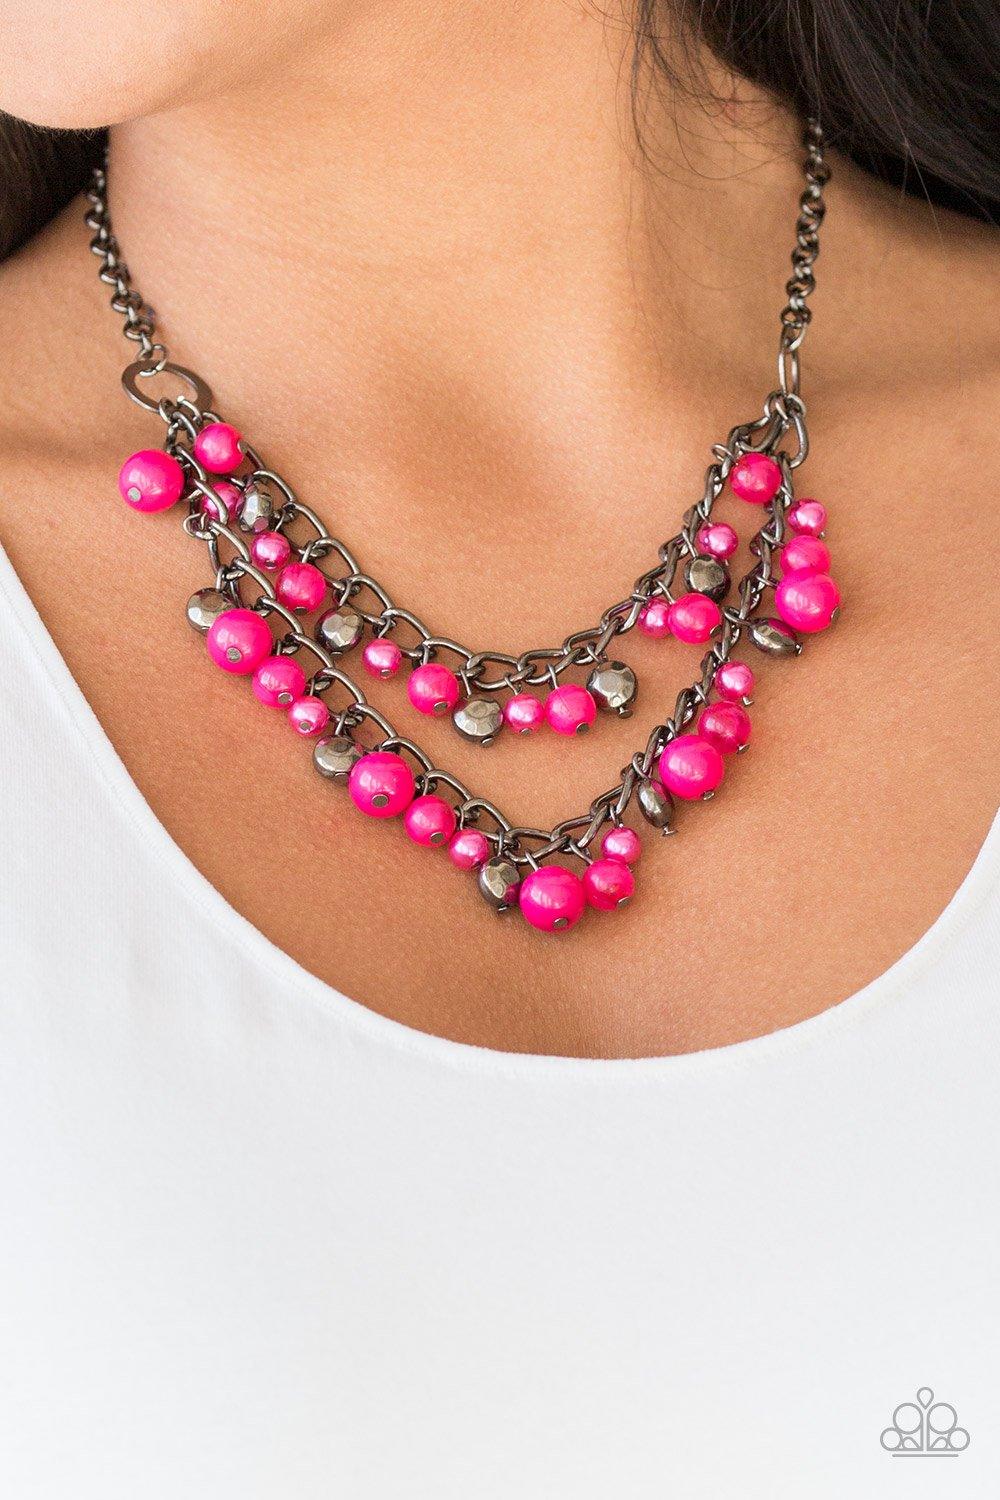 Paparazzi Accessories Watch Me Now - Pink Pearly and polished pink beading joins faceted gunmetal beads along a bold gunmetal chain, creating a sassy fringe below the collar. Features an adjustable clasp closure. Sold as one individual necklace. Includes